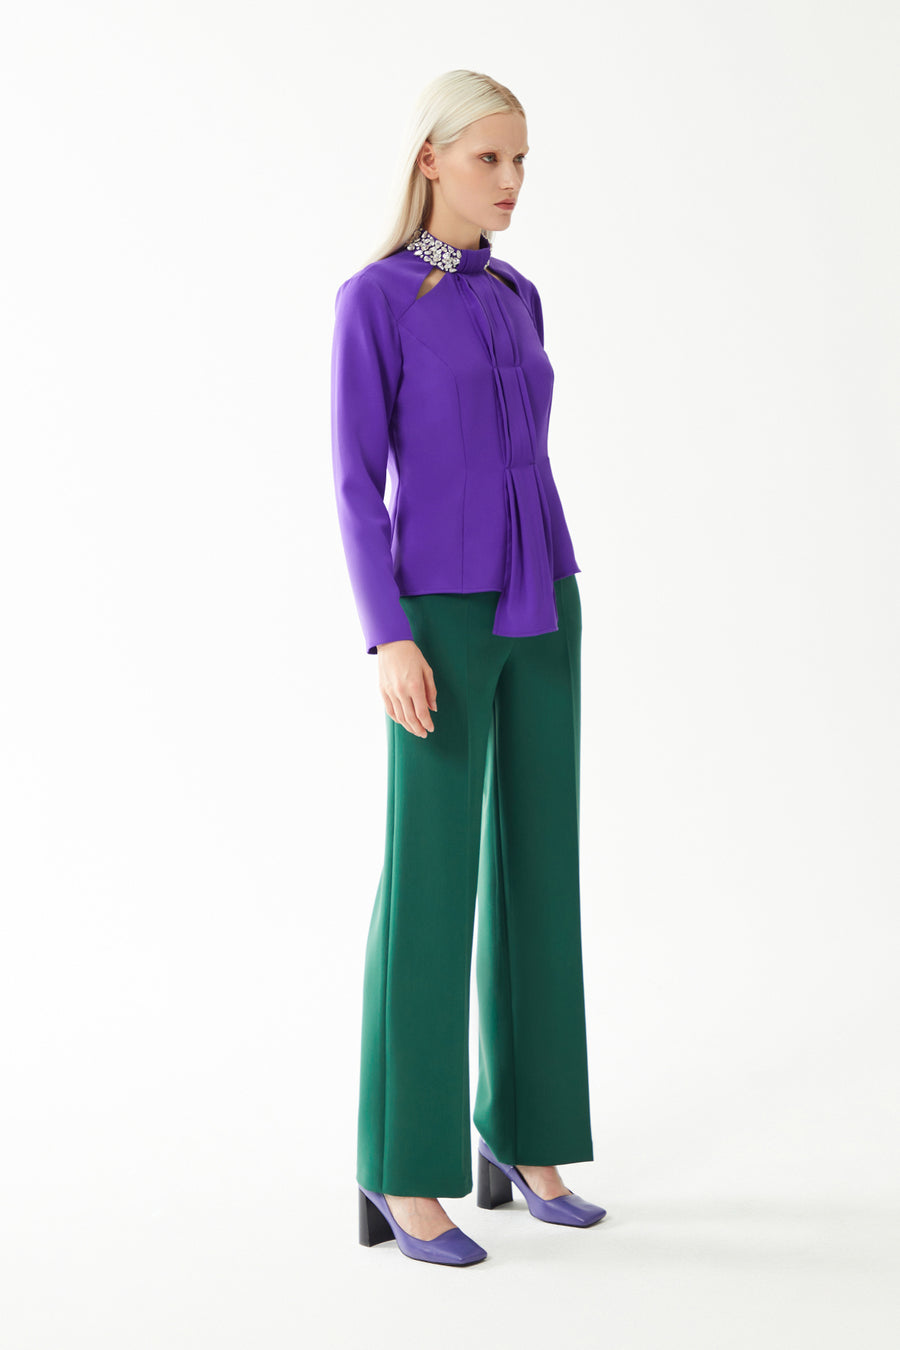 PURPLE COLLAR WITH STONE EMBROIDERY AND WINDOW LONG-SLEEVE BLOUSE